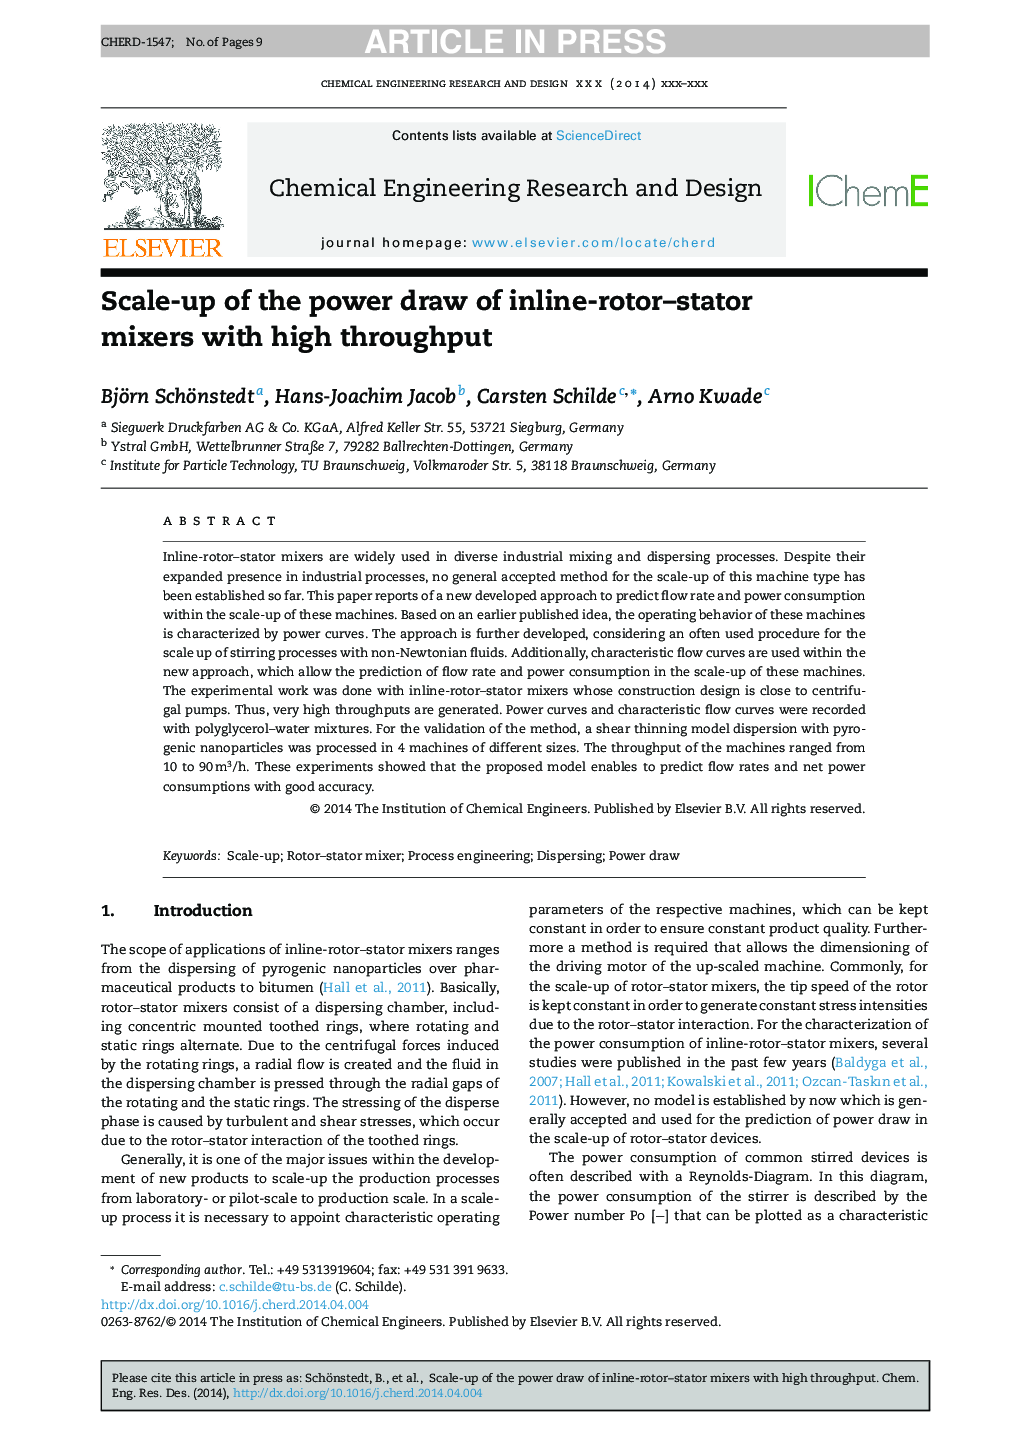 Scale-up of the power draw of inline-rotor-stator mixers with high throughput